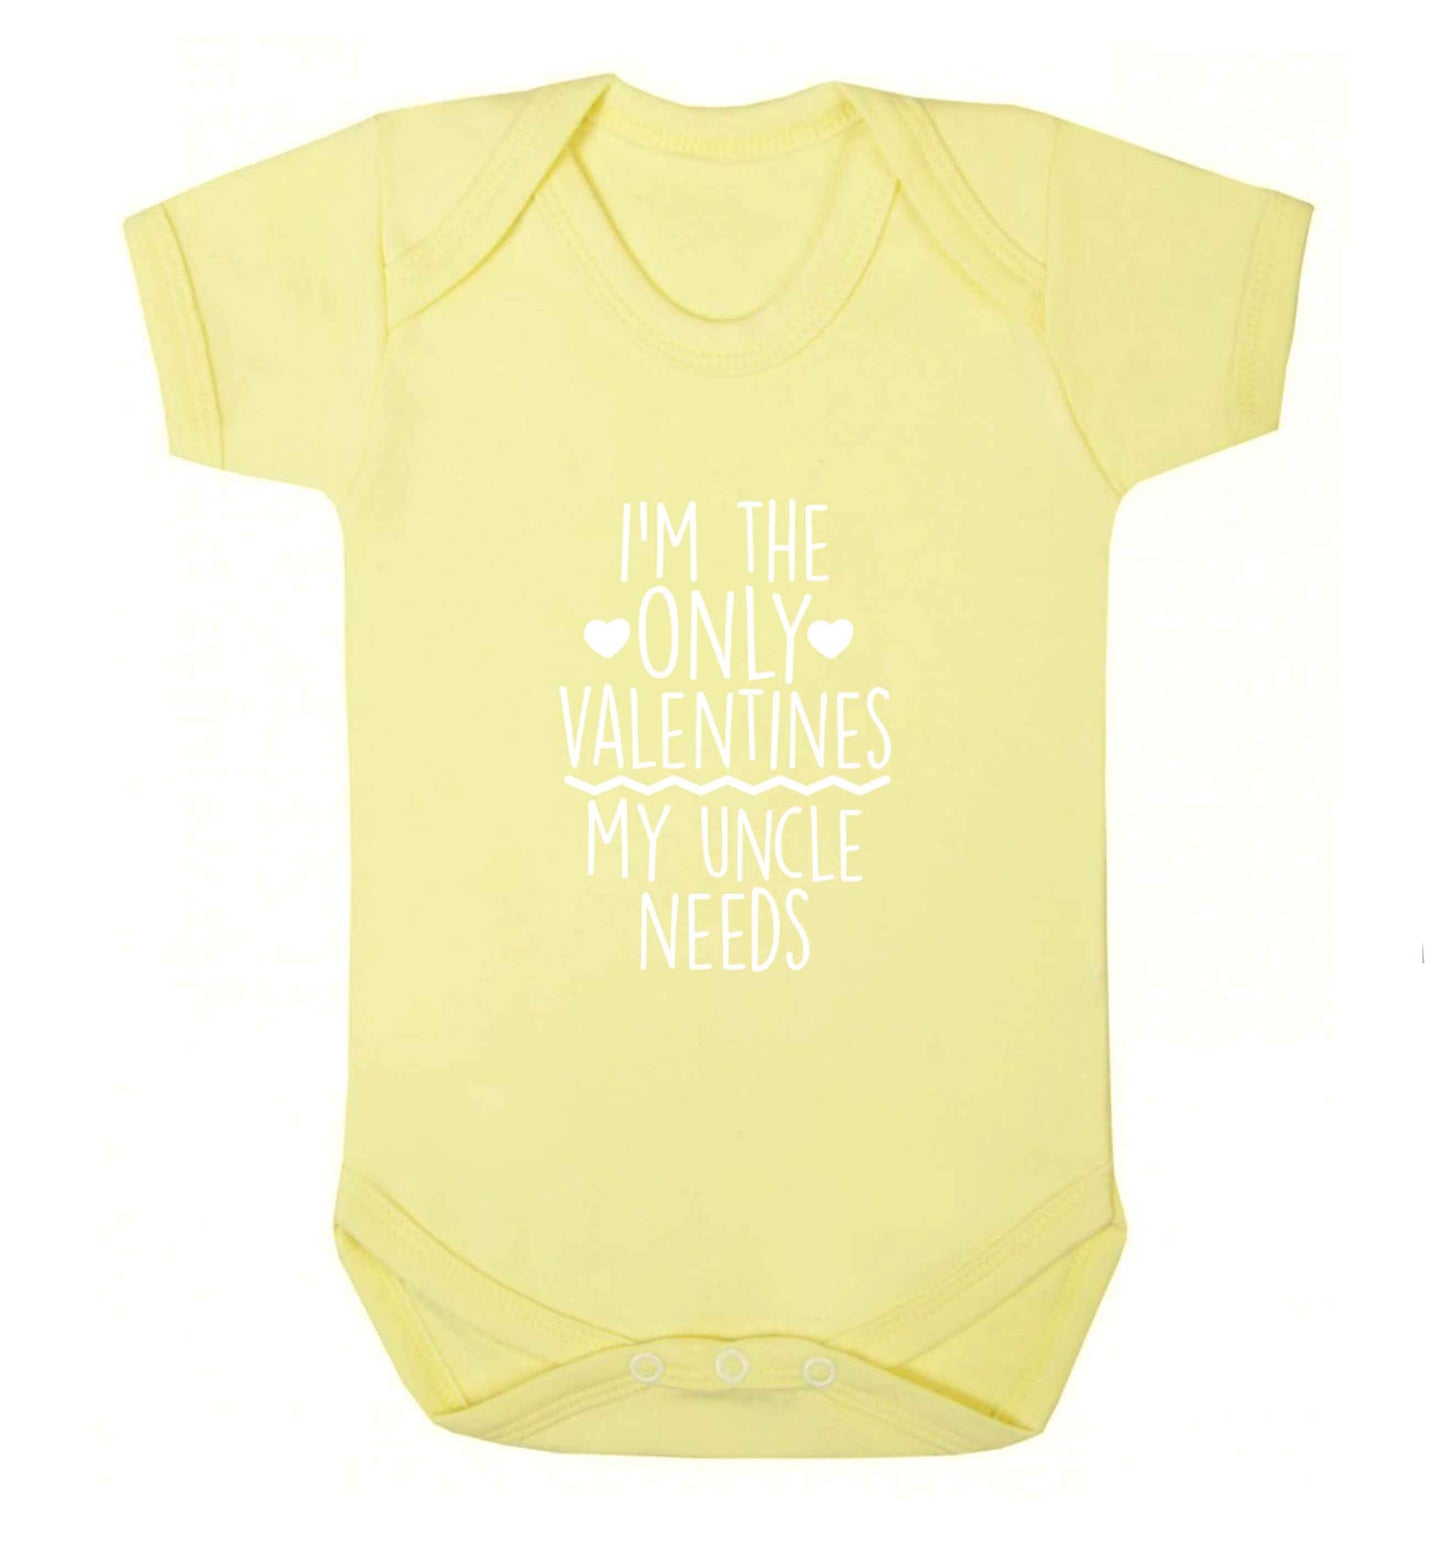 I'm the only valentines my uncle needs baby vest pale yellow 18-24 months